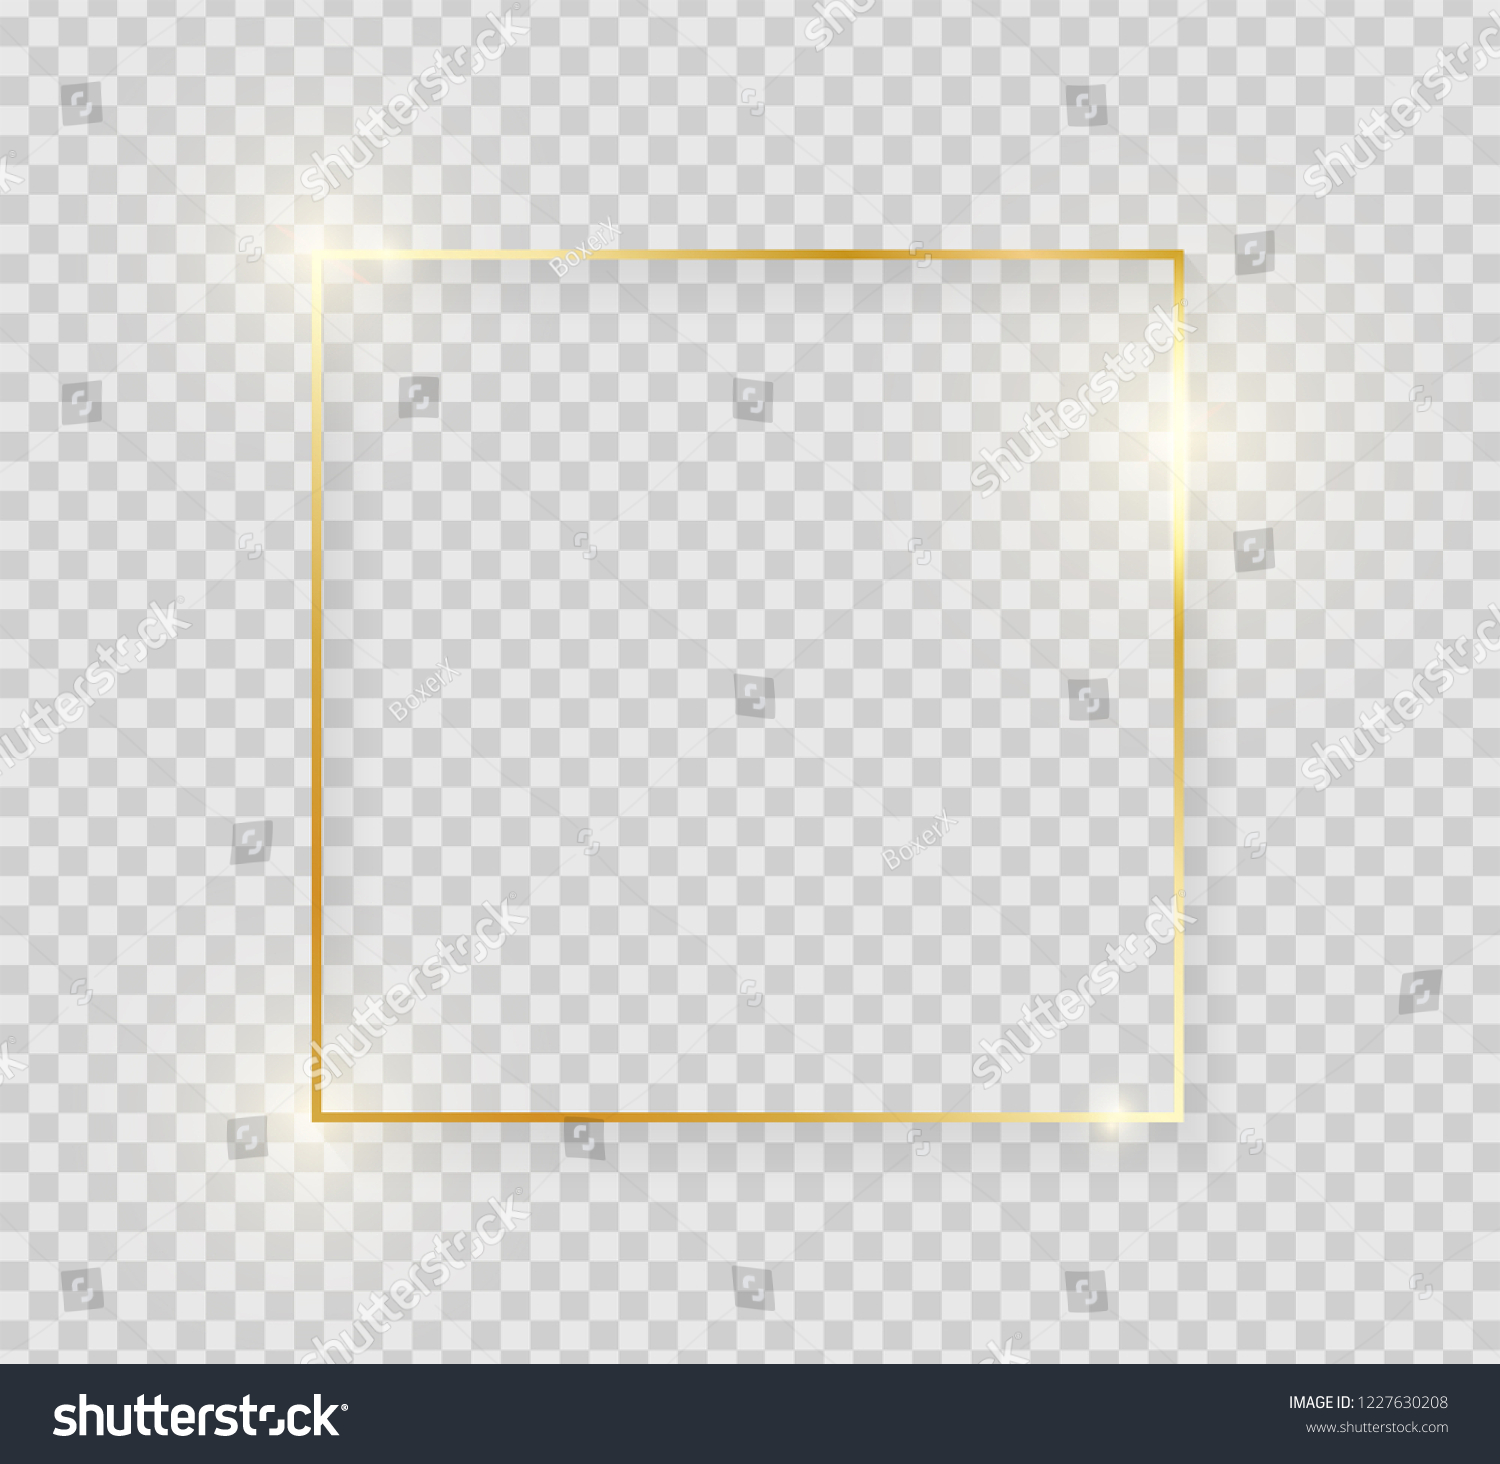 Gold shiny glowing vintage frame with shadows isolated on transparent background. Golden luxury realistic square border. Vector illustration #1227630208